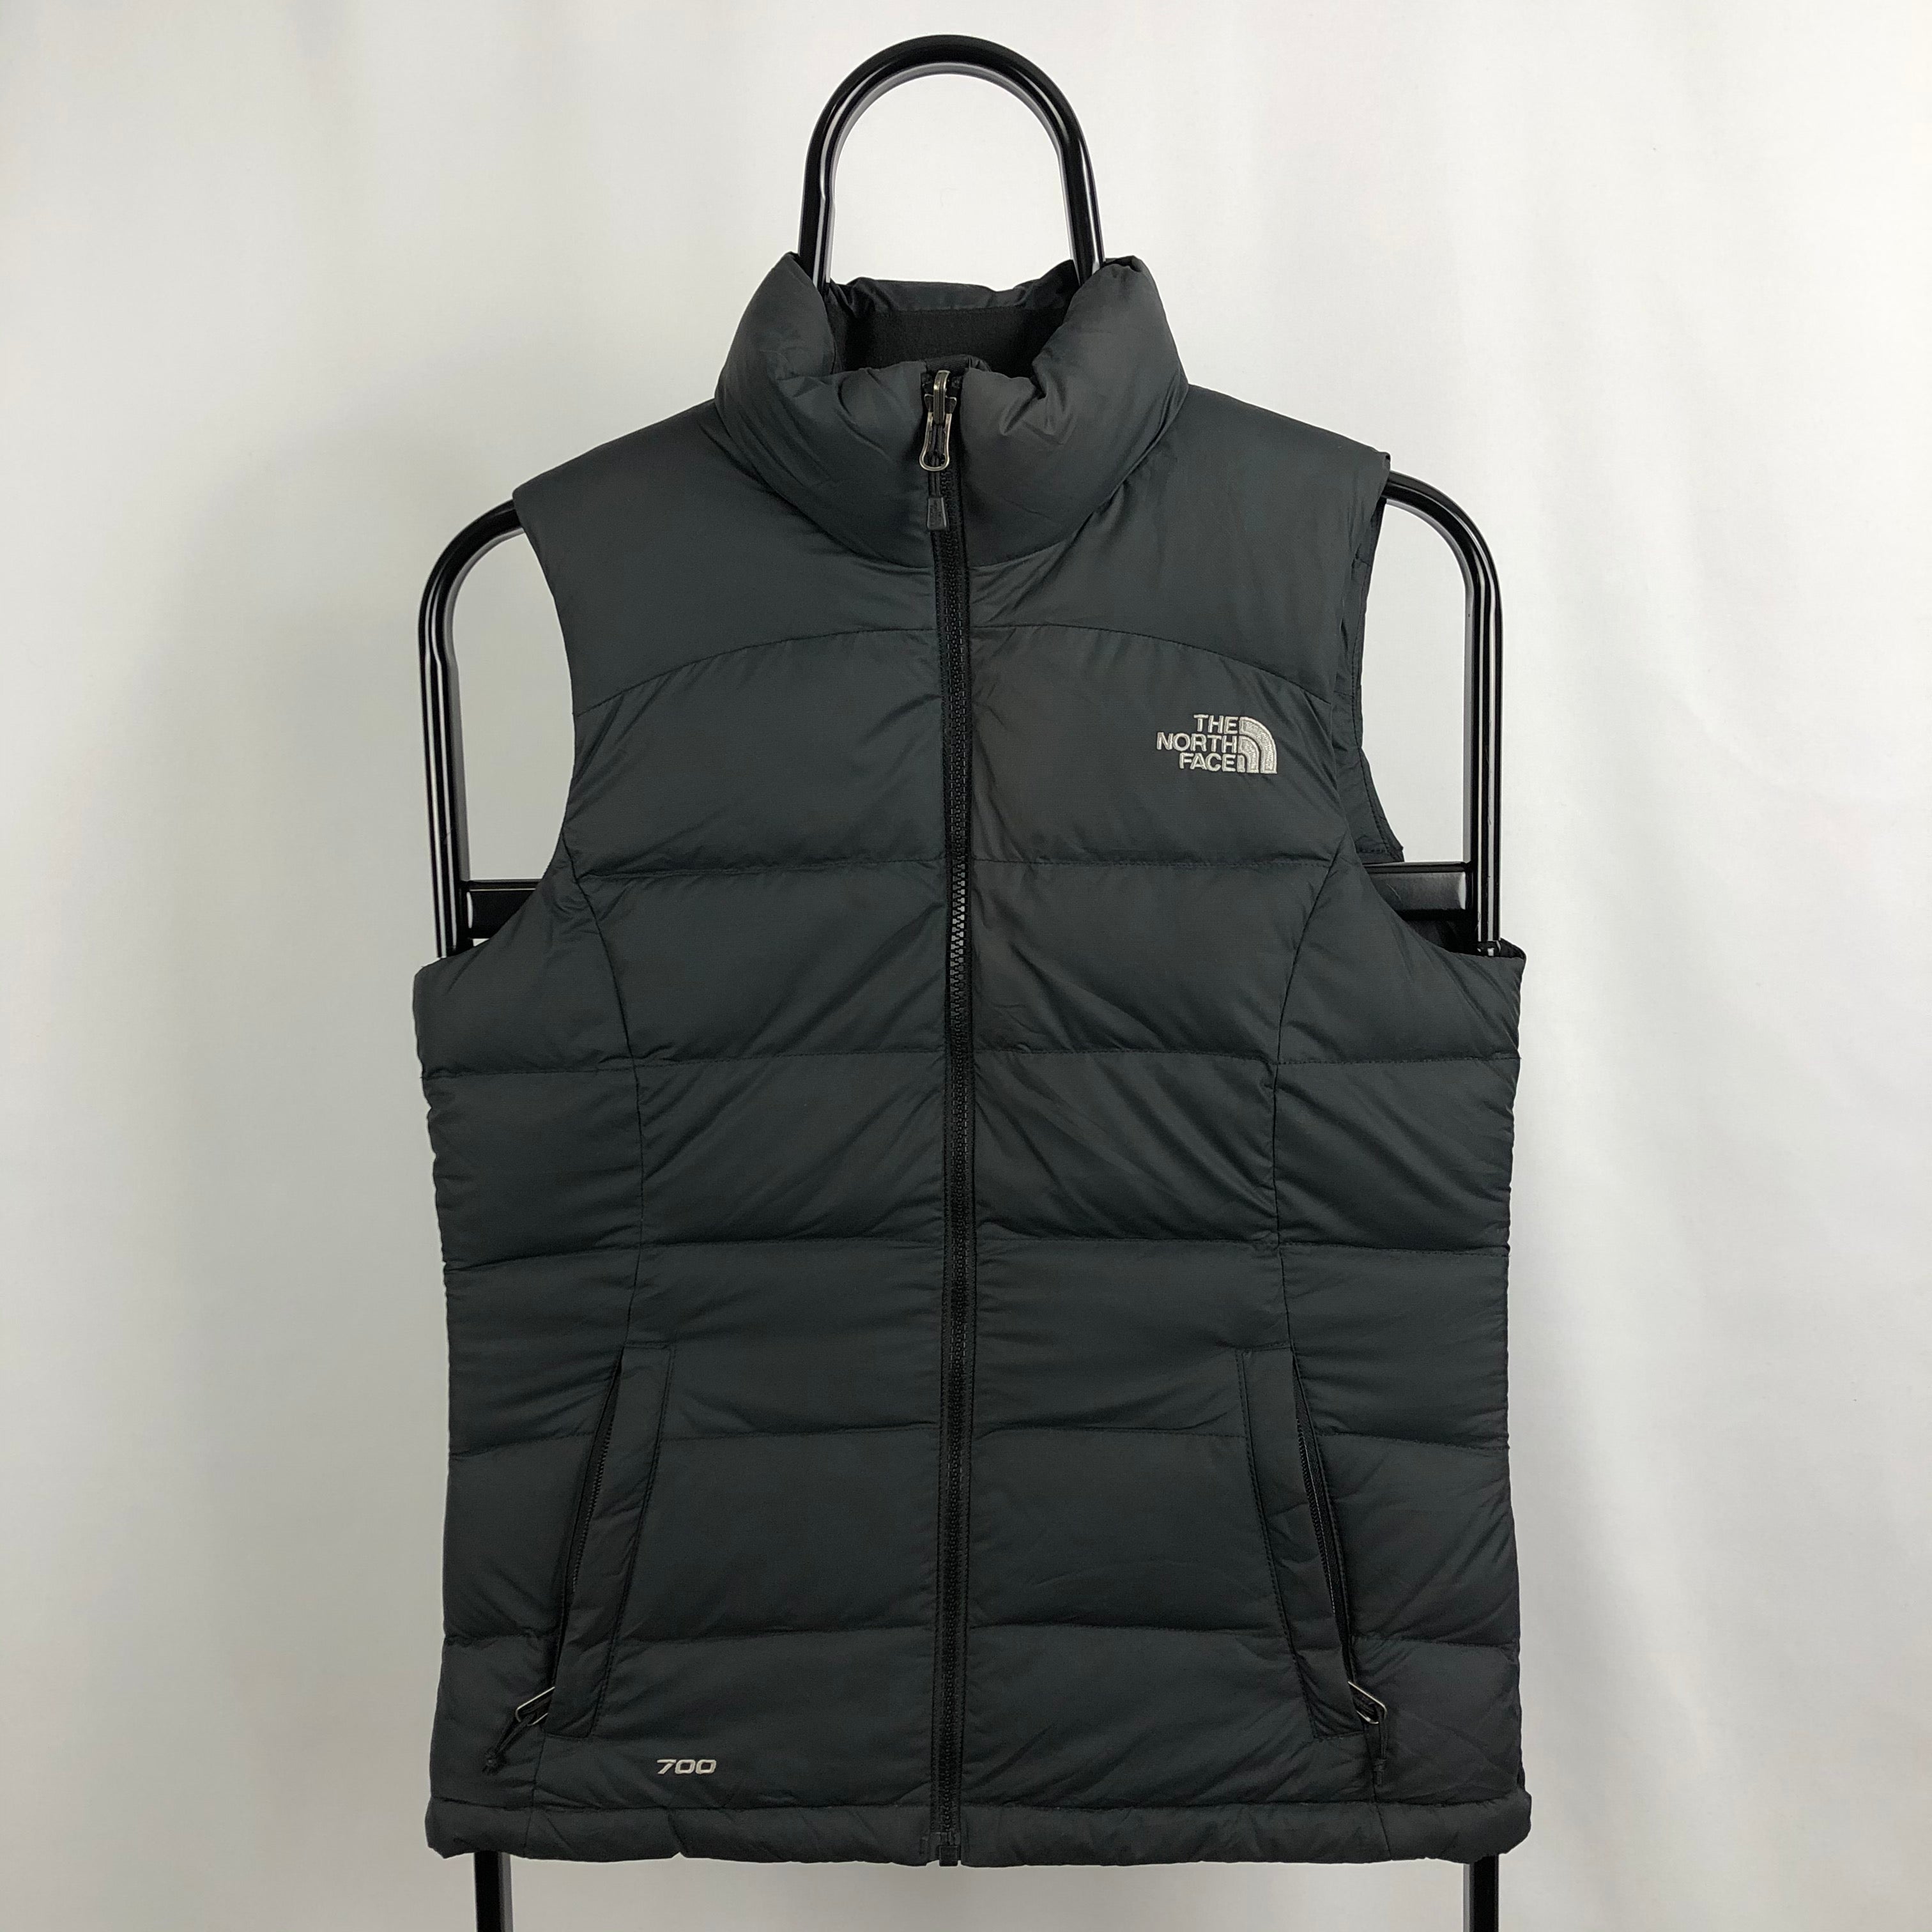 The North Face 700 Gilet in Black - Women's XS - Vintique Clothing